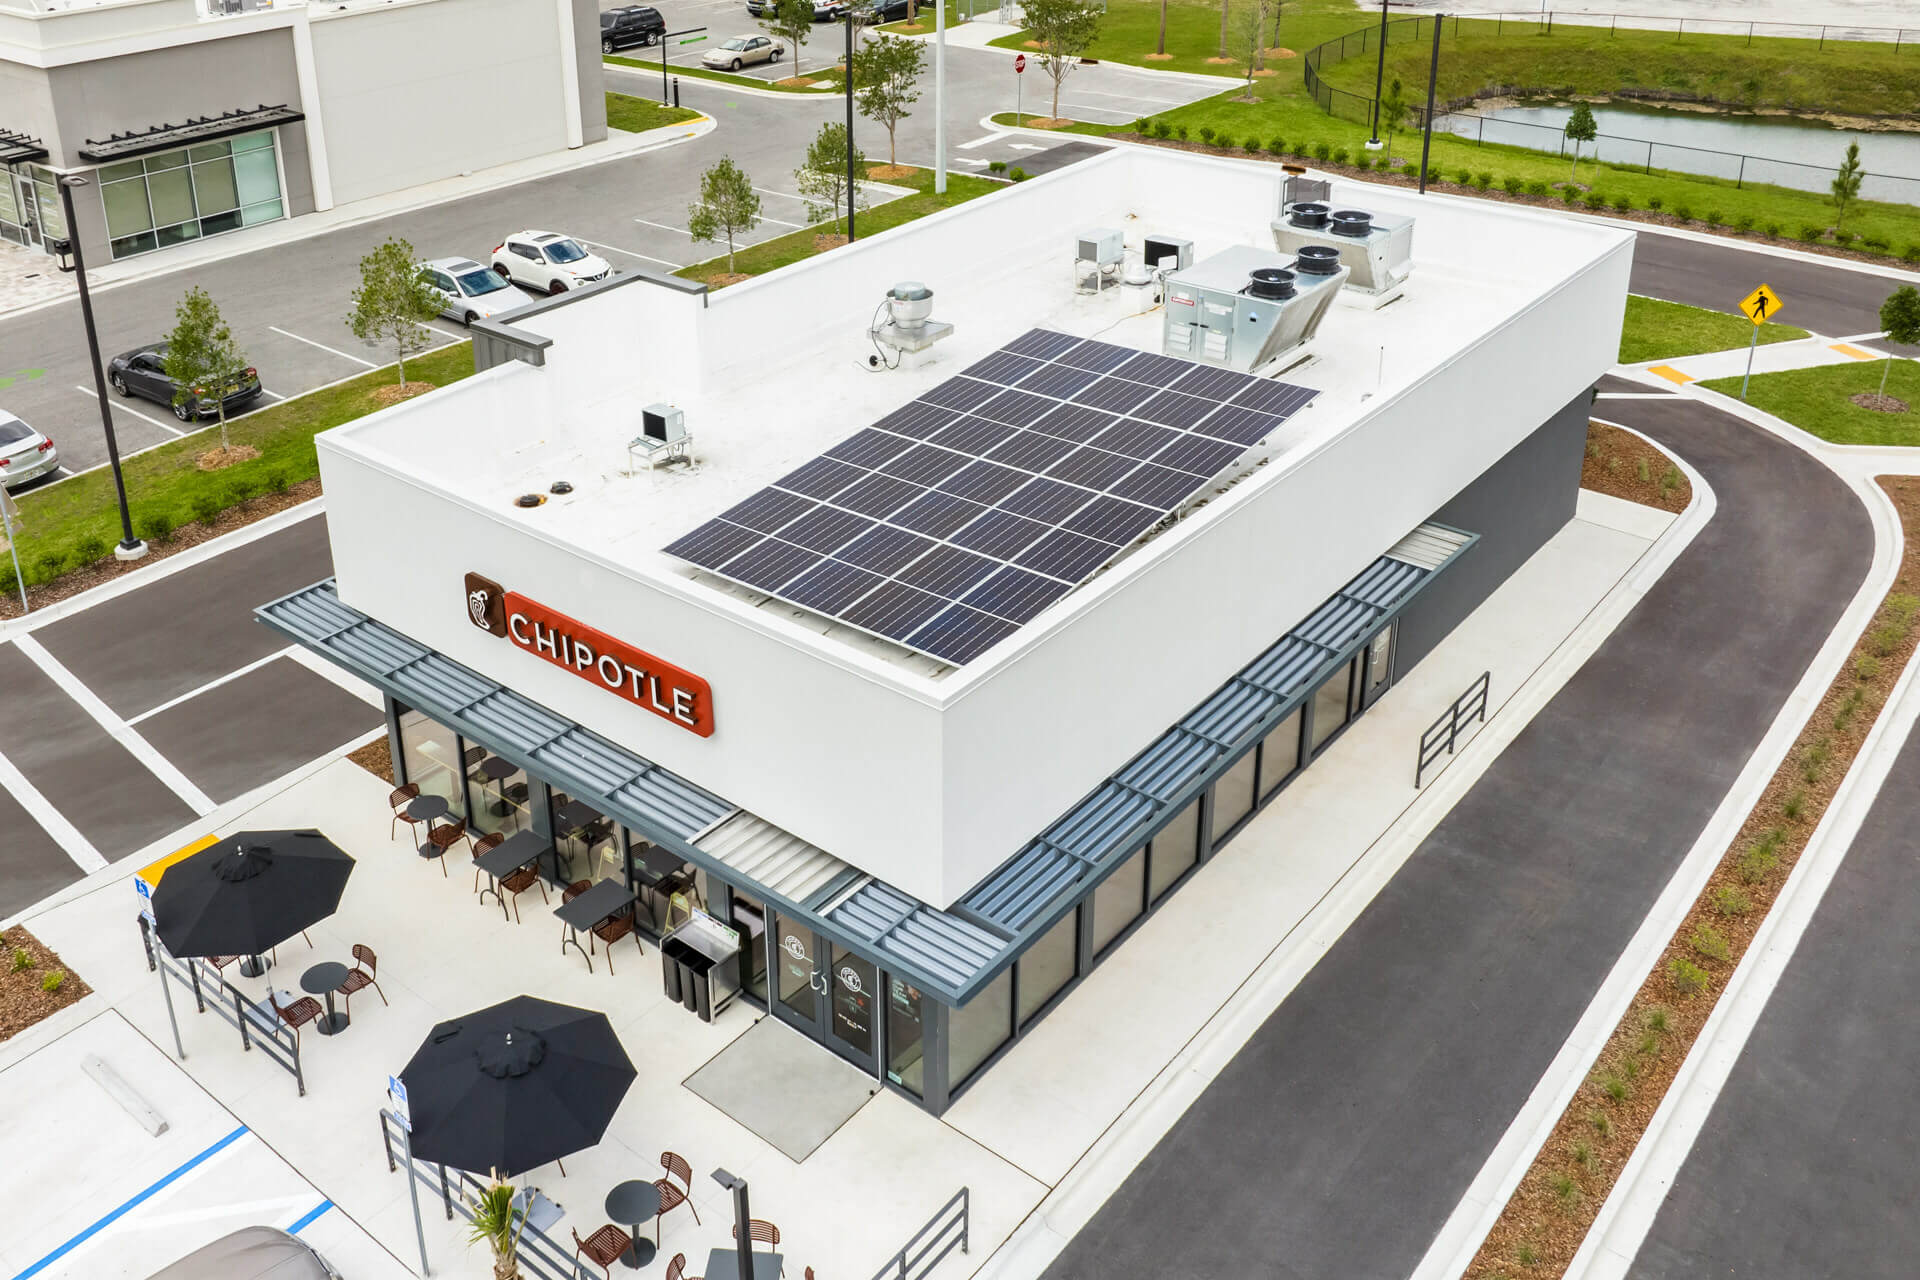 chipotle restaurant rendering with solar panels